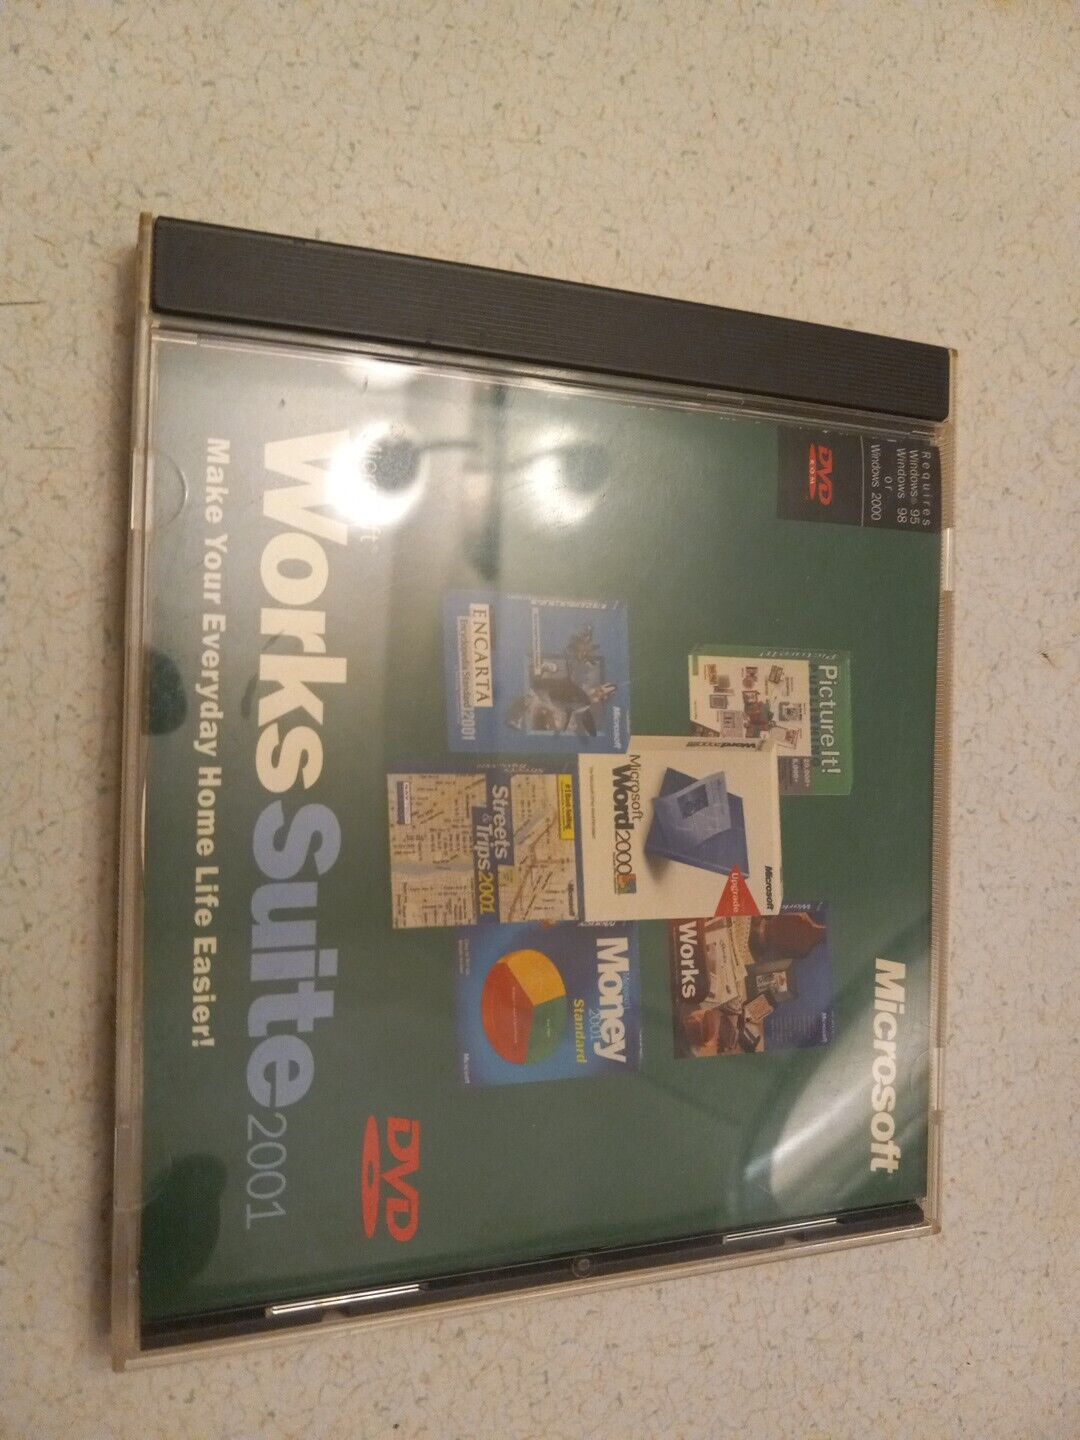 Microsoft Works Suite 2001 With Product Key